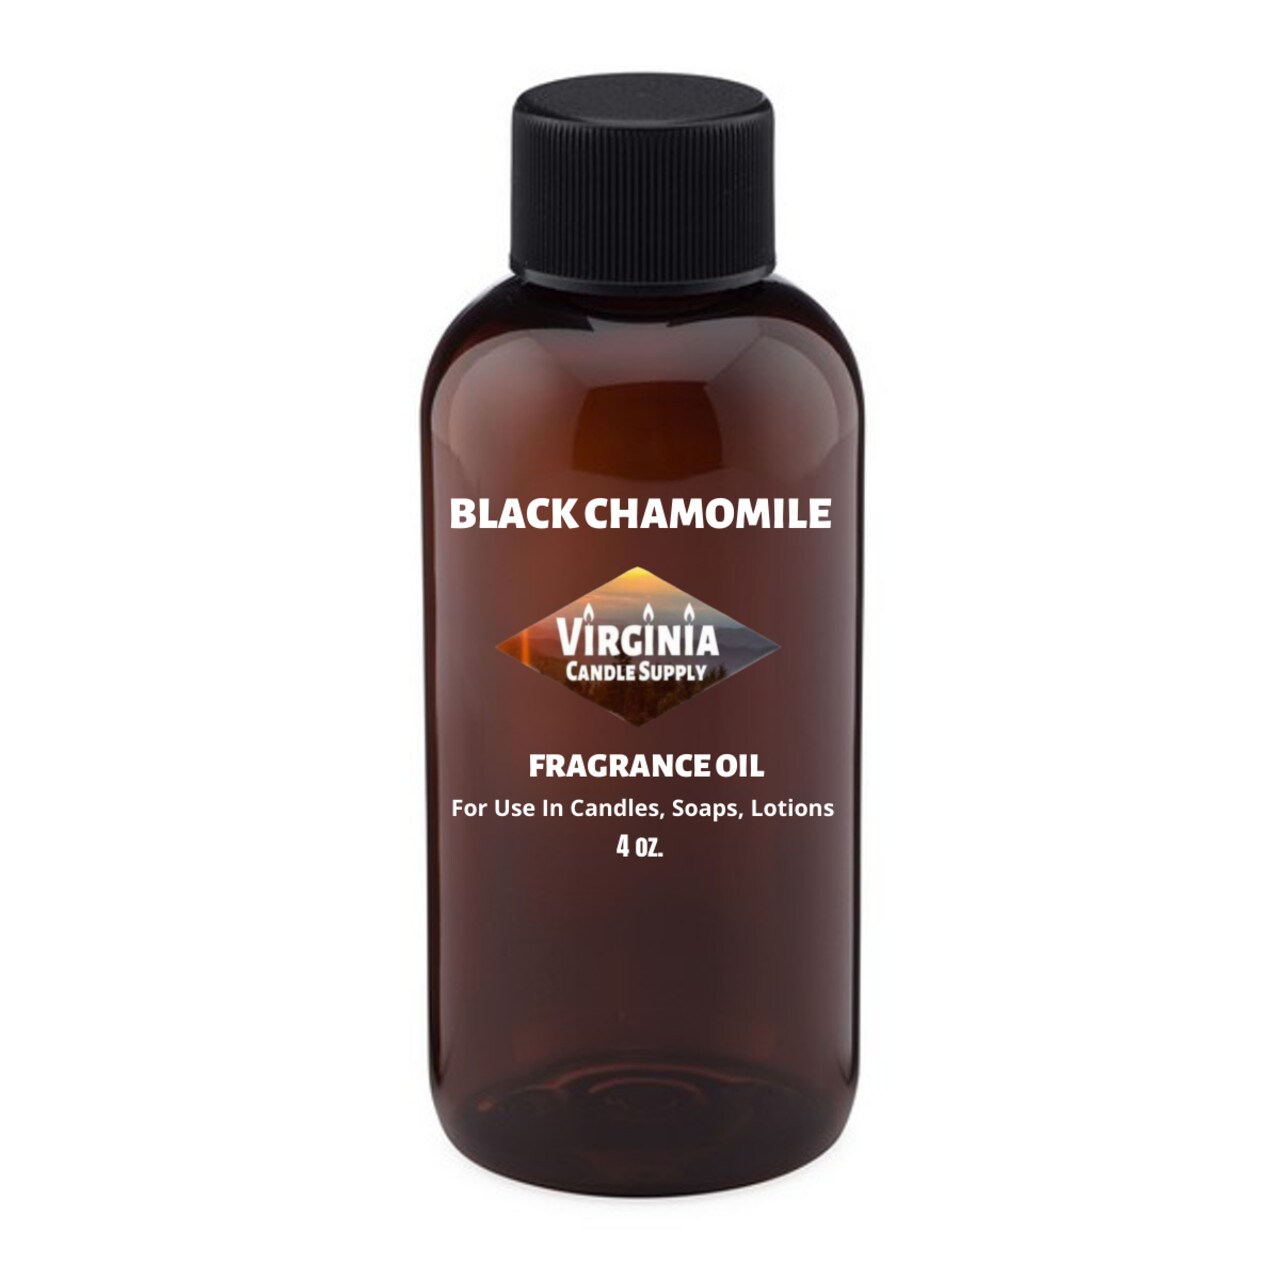 Black Chamomile Fragrance Oil (Our Version of the Brand Name) (4 oz Bottle) for Candle Making, Soap Making, Tart Making, Room Sprays, Lotions, Car Fresheners, Slime, Bath Bombs, Warmers&#x2026;